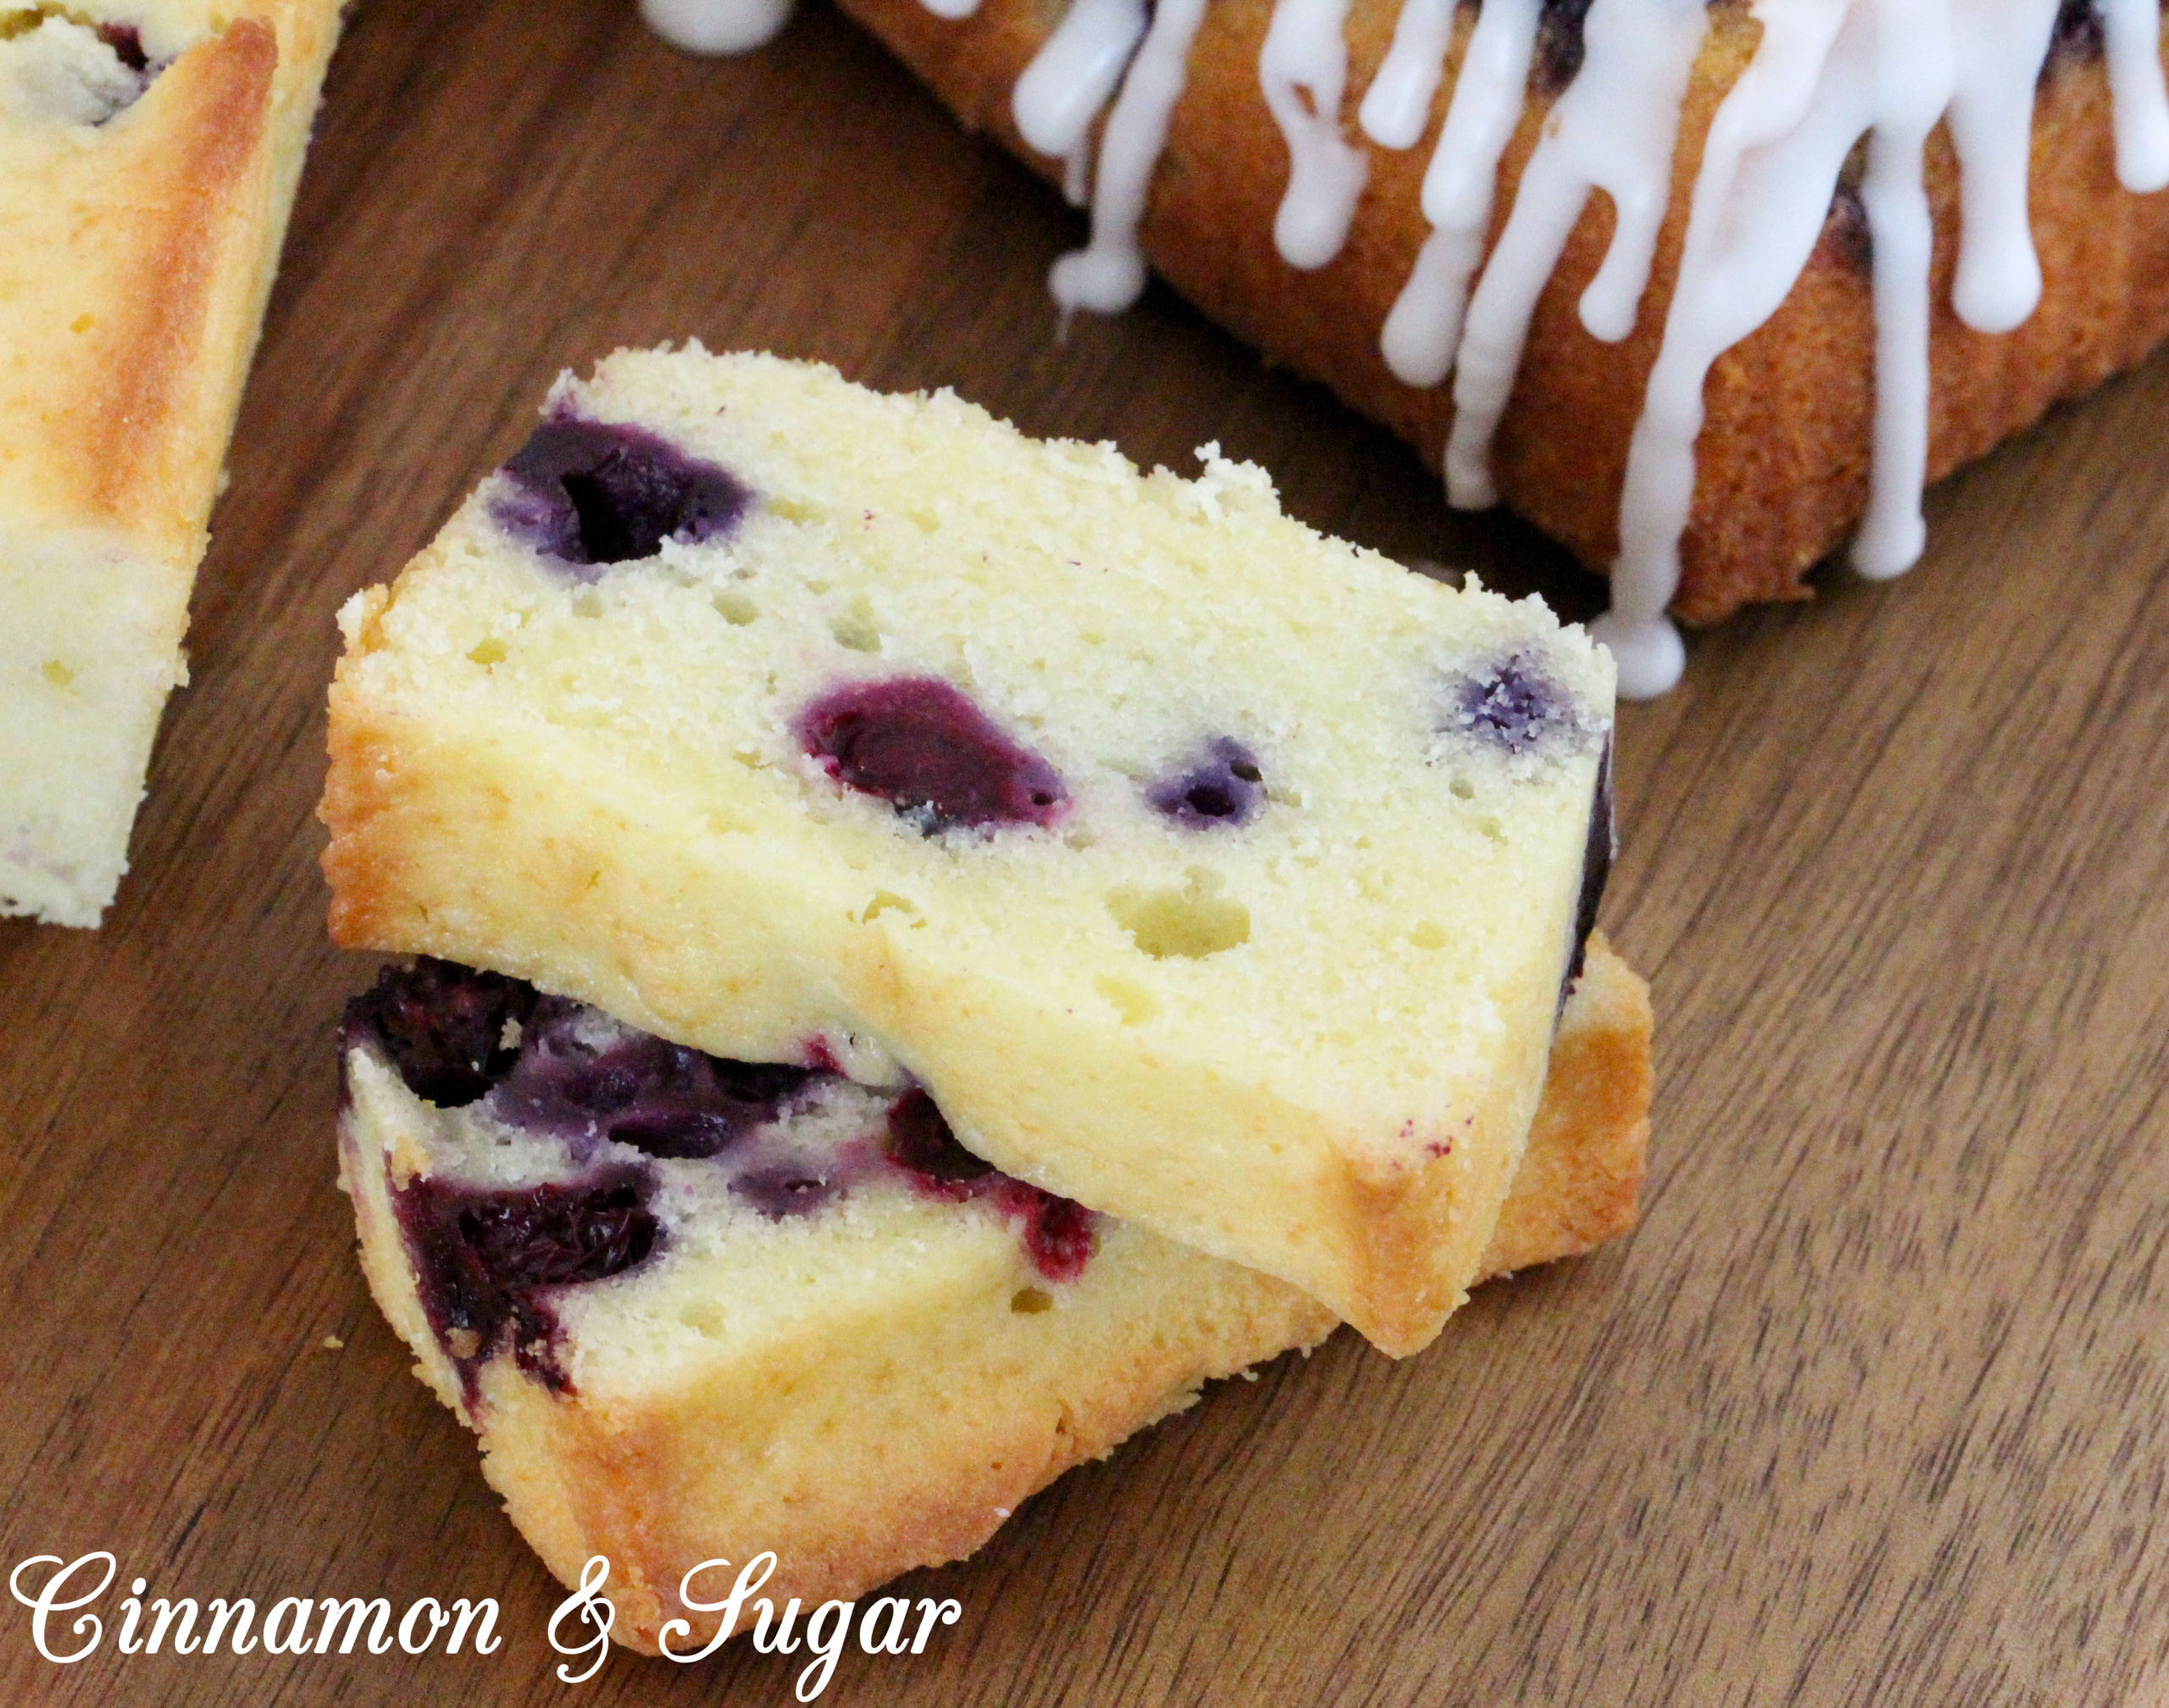 Blueberry Cream Cheese Bread is loaded with plump, fresh blueberries and tangy cream cheese, making this a supremely moist and flavorful treat! Recipe shared with permission granted by Lee Hollis, author of DEATH OF A BLUEBERRY TART. 